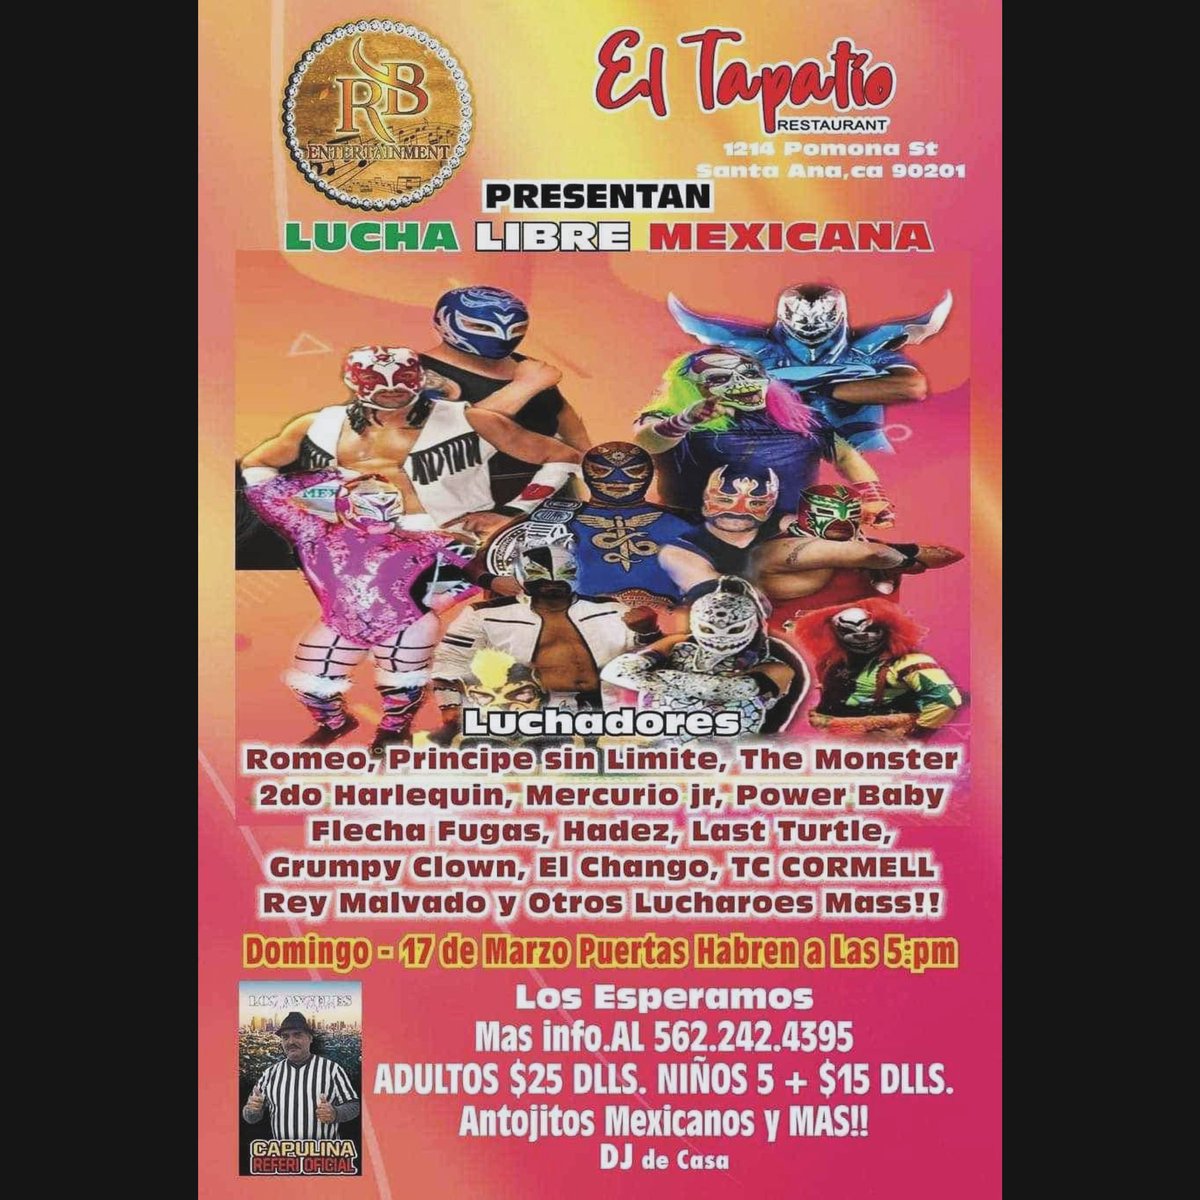 Today you don’t wanna miss this great wrestling event !!!

Hoy no se quedran  perder este evento de lucha libre !!!!

#Prowrestling

#IndependentWrestling

#SoCalWrestling

#LuchaLibre

#Wrestling

#WWE

#AEW

#RingOfHonor

#LuchaLibreaaa

#westcoastprowrestling